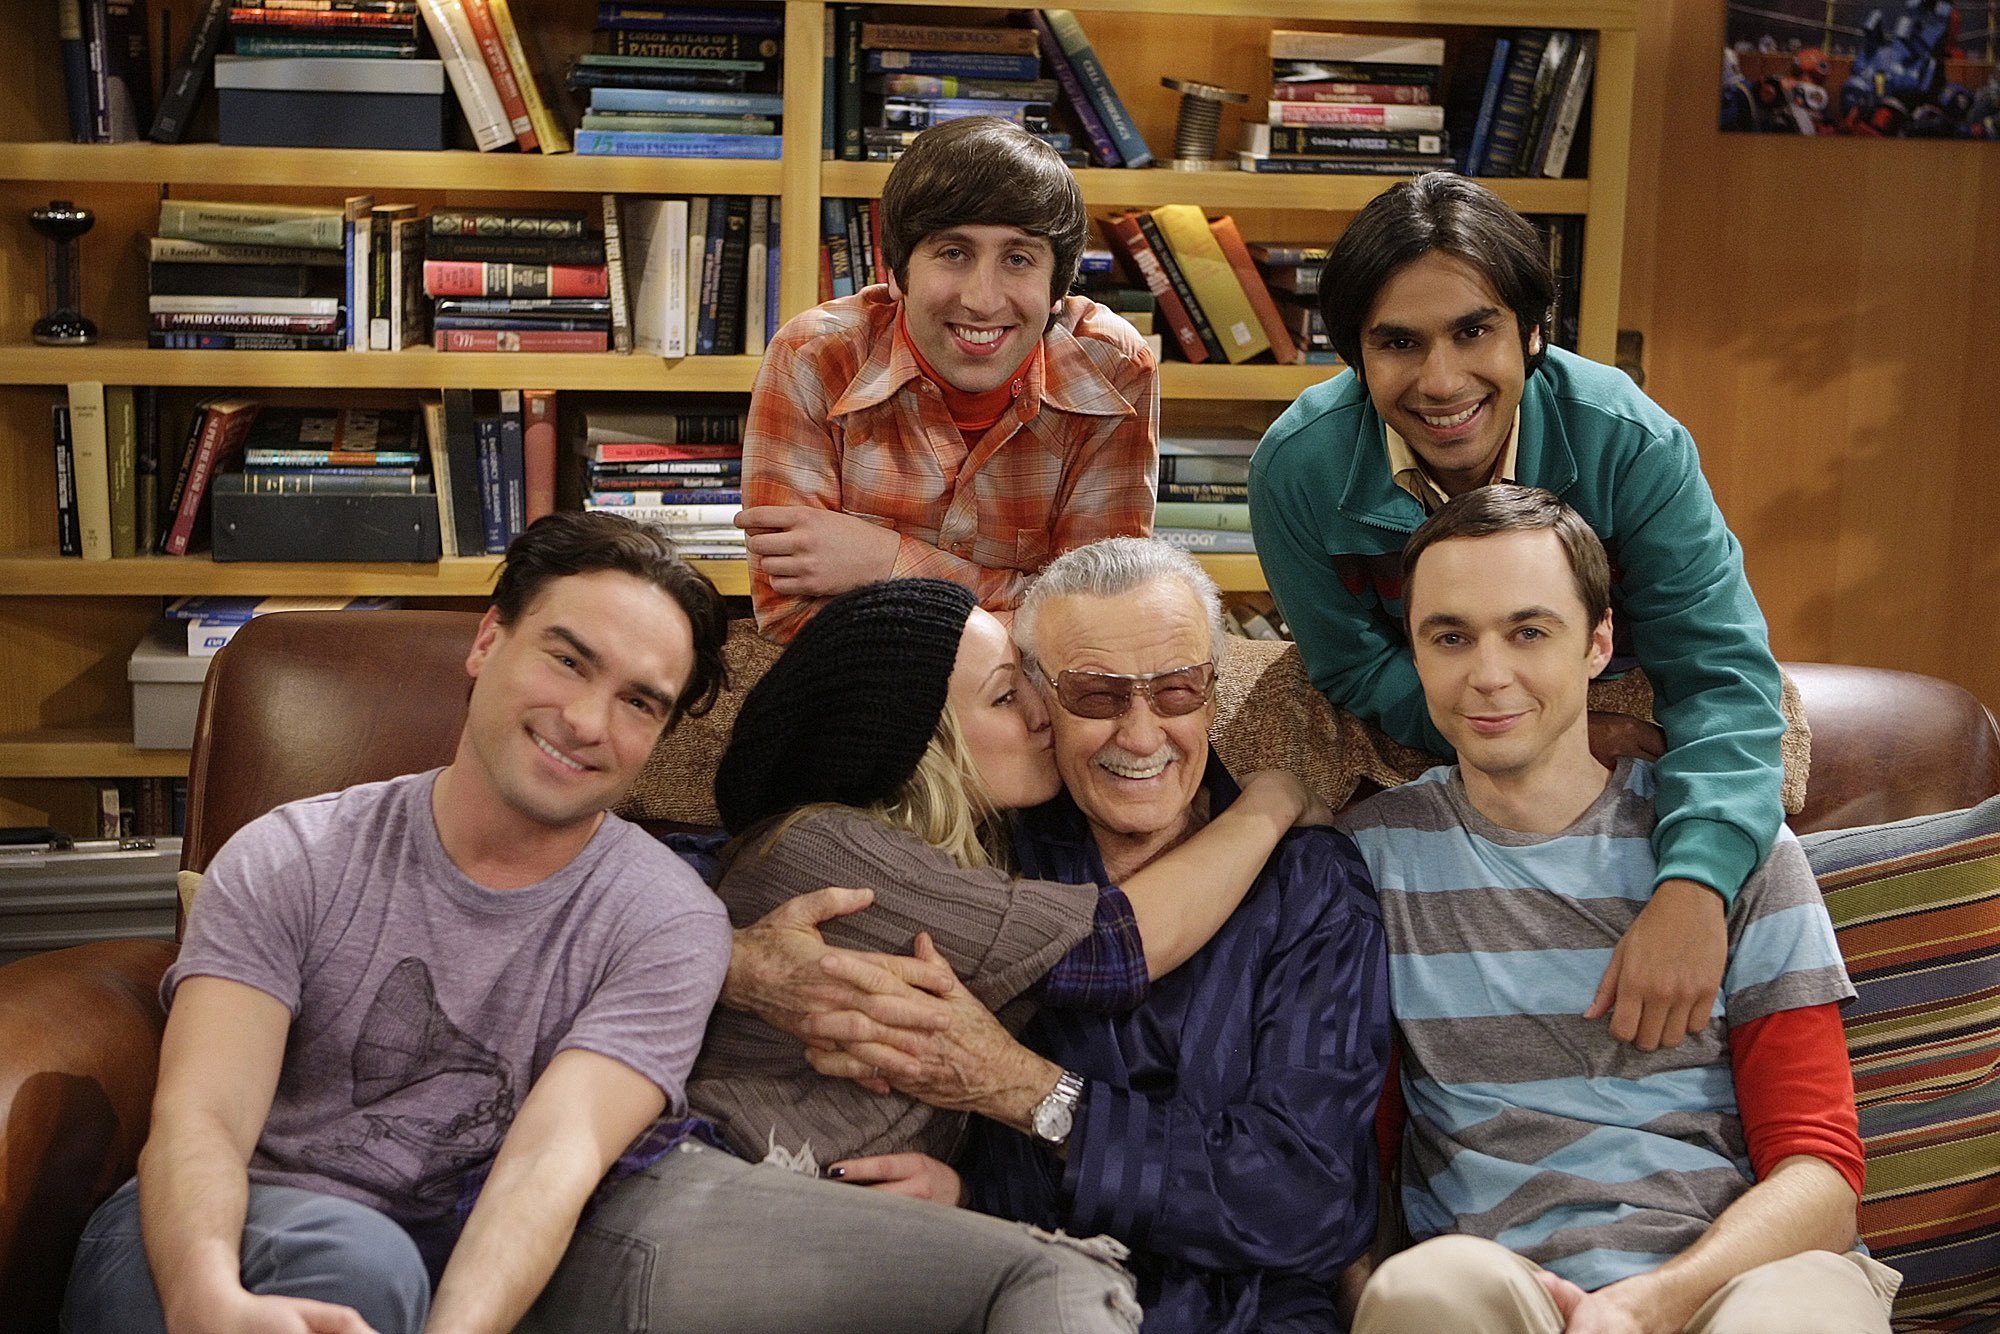 Johnny Galecki Simon Helberg, Kunal Nayyar, Jim Parsons, Kaley Cuoco pose with Stan Lee, who guest stars as himself in an episode of The Big Bang Theory